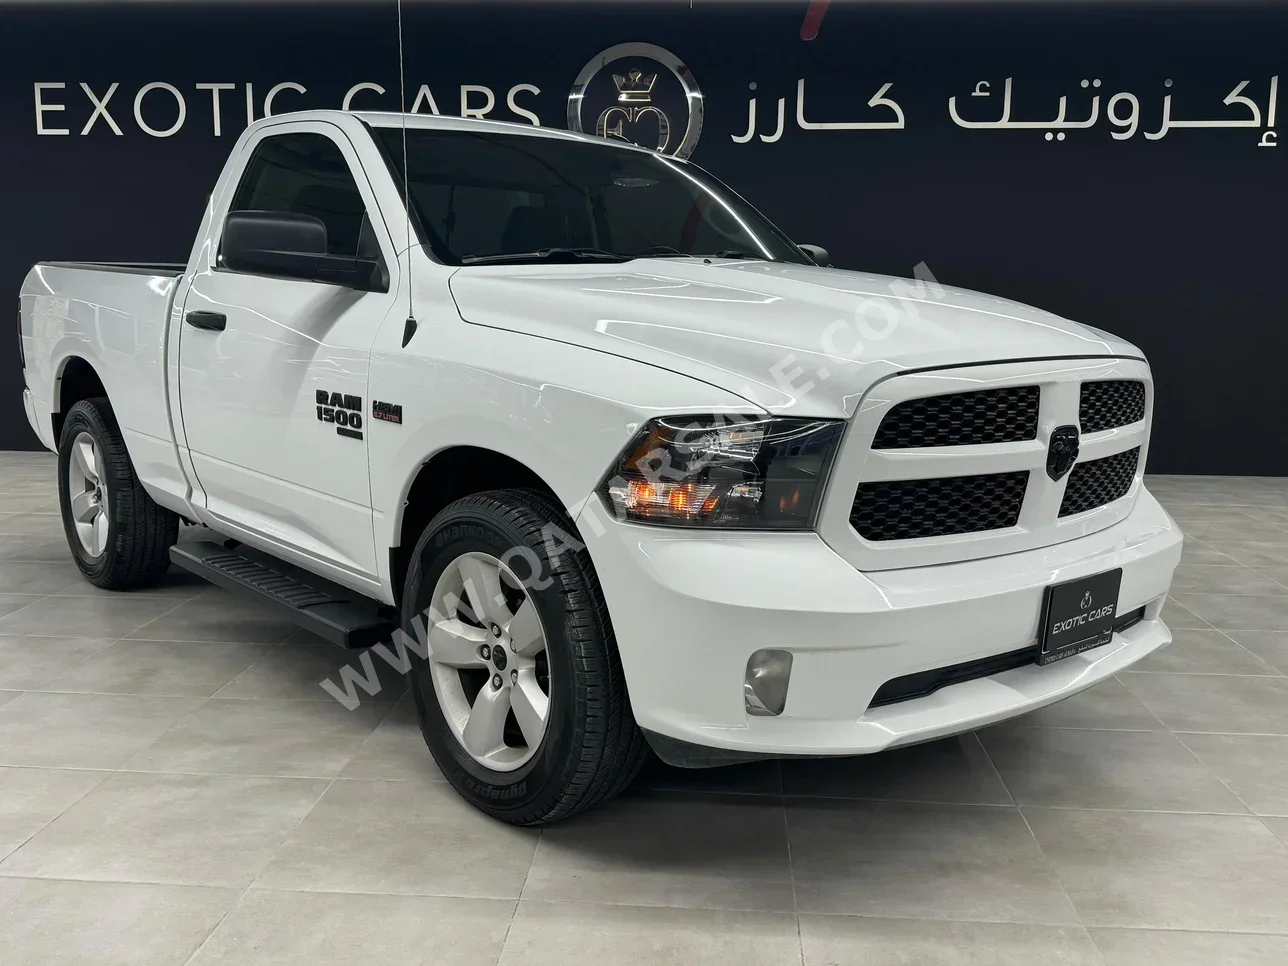 Dodge  Ram  1500 Classic  2022  Automatic  24,000 Km  8 Cylinder  Four Wheel Drive (4WD)  Pick Up  White  With Warranty